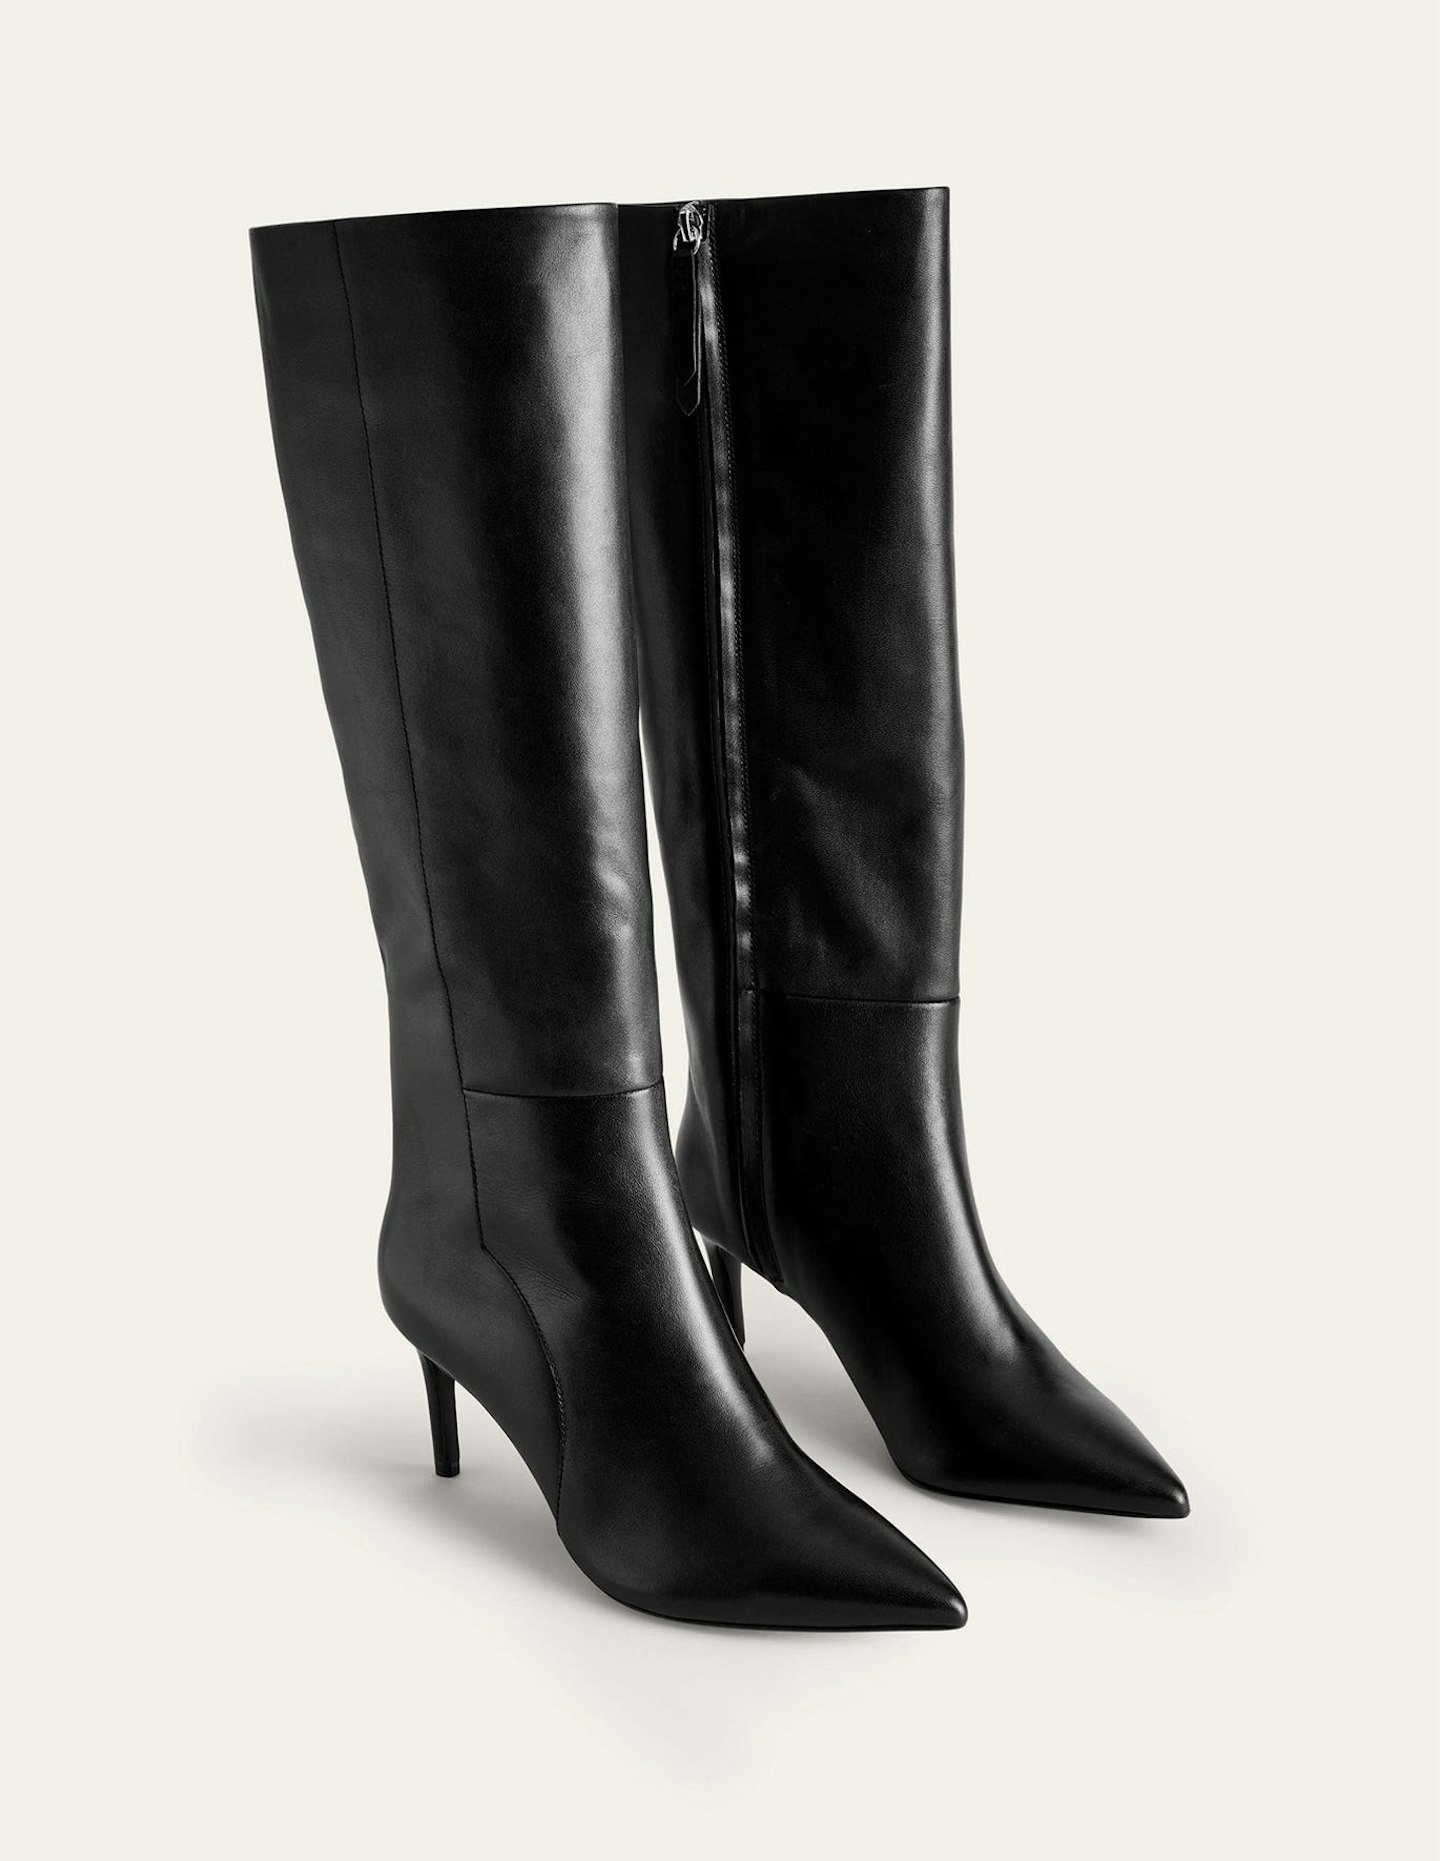 Boden, Pointed-Toe Knee-High Boots